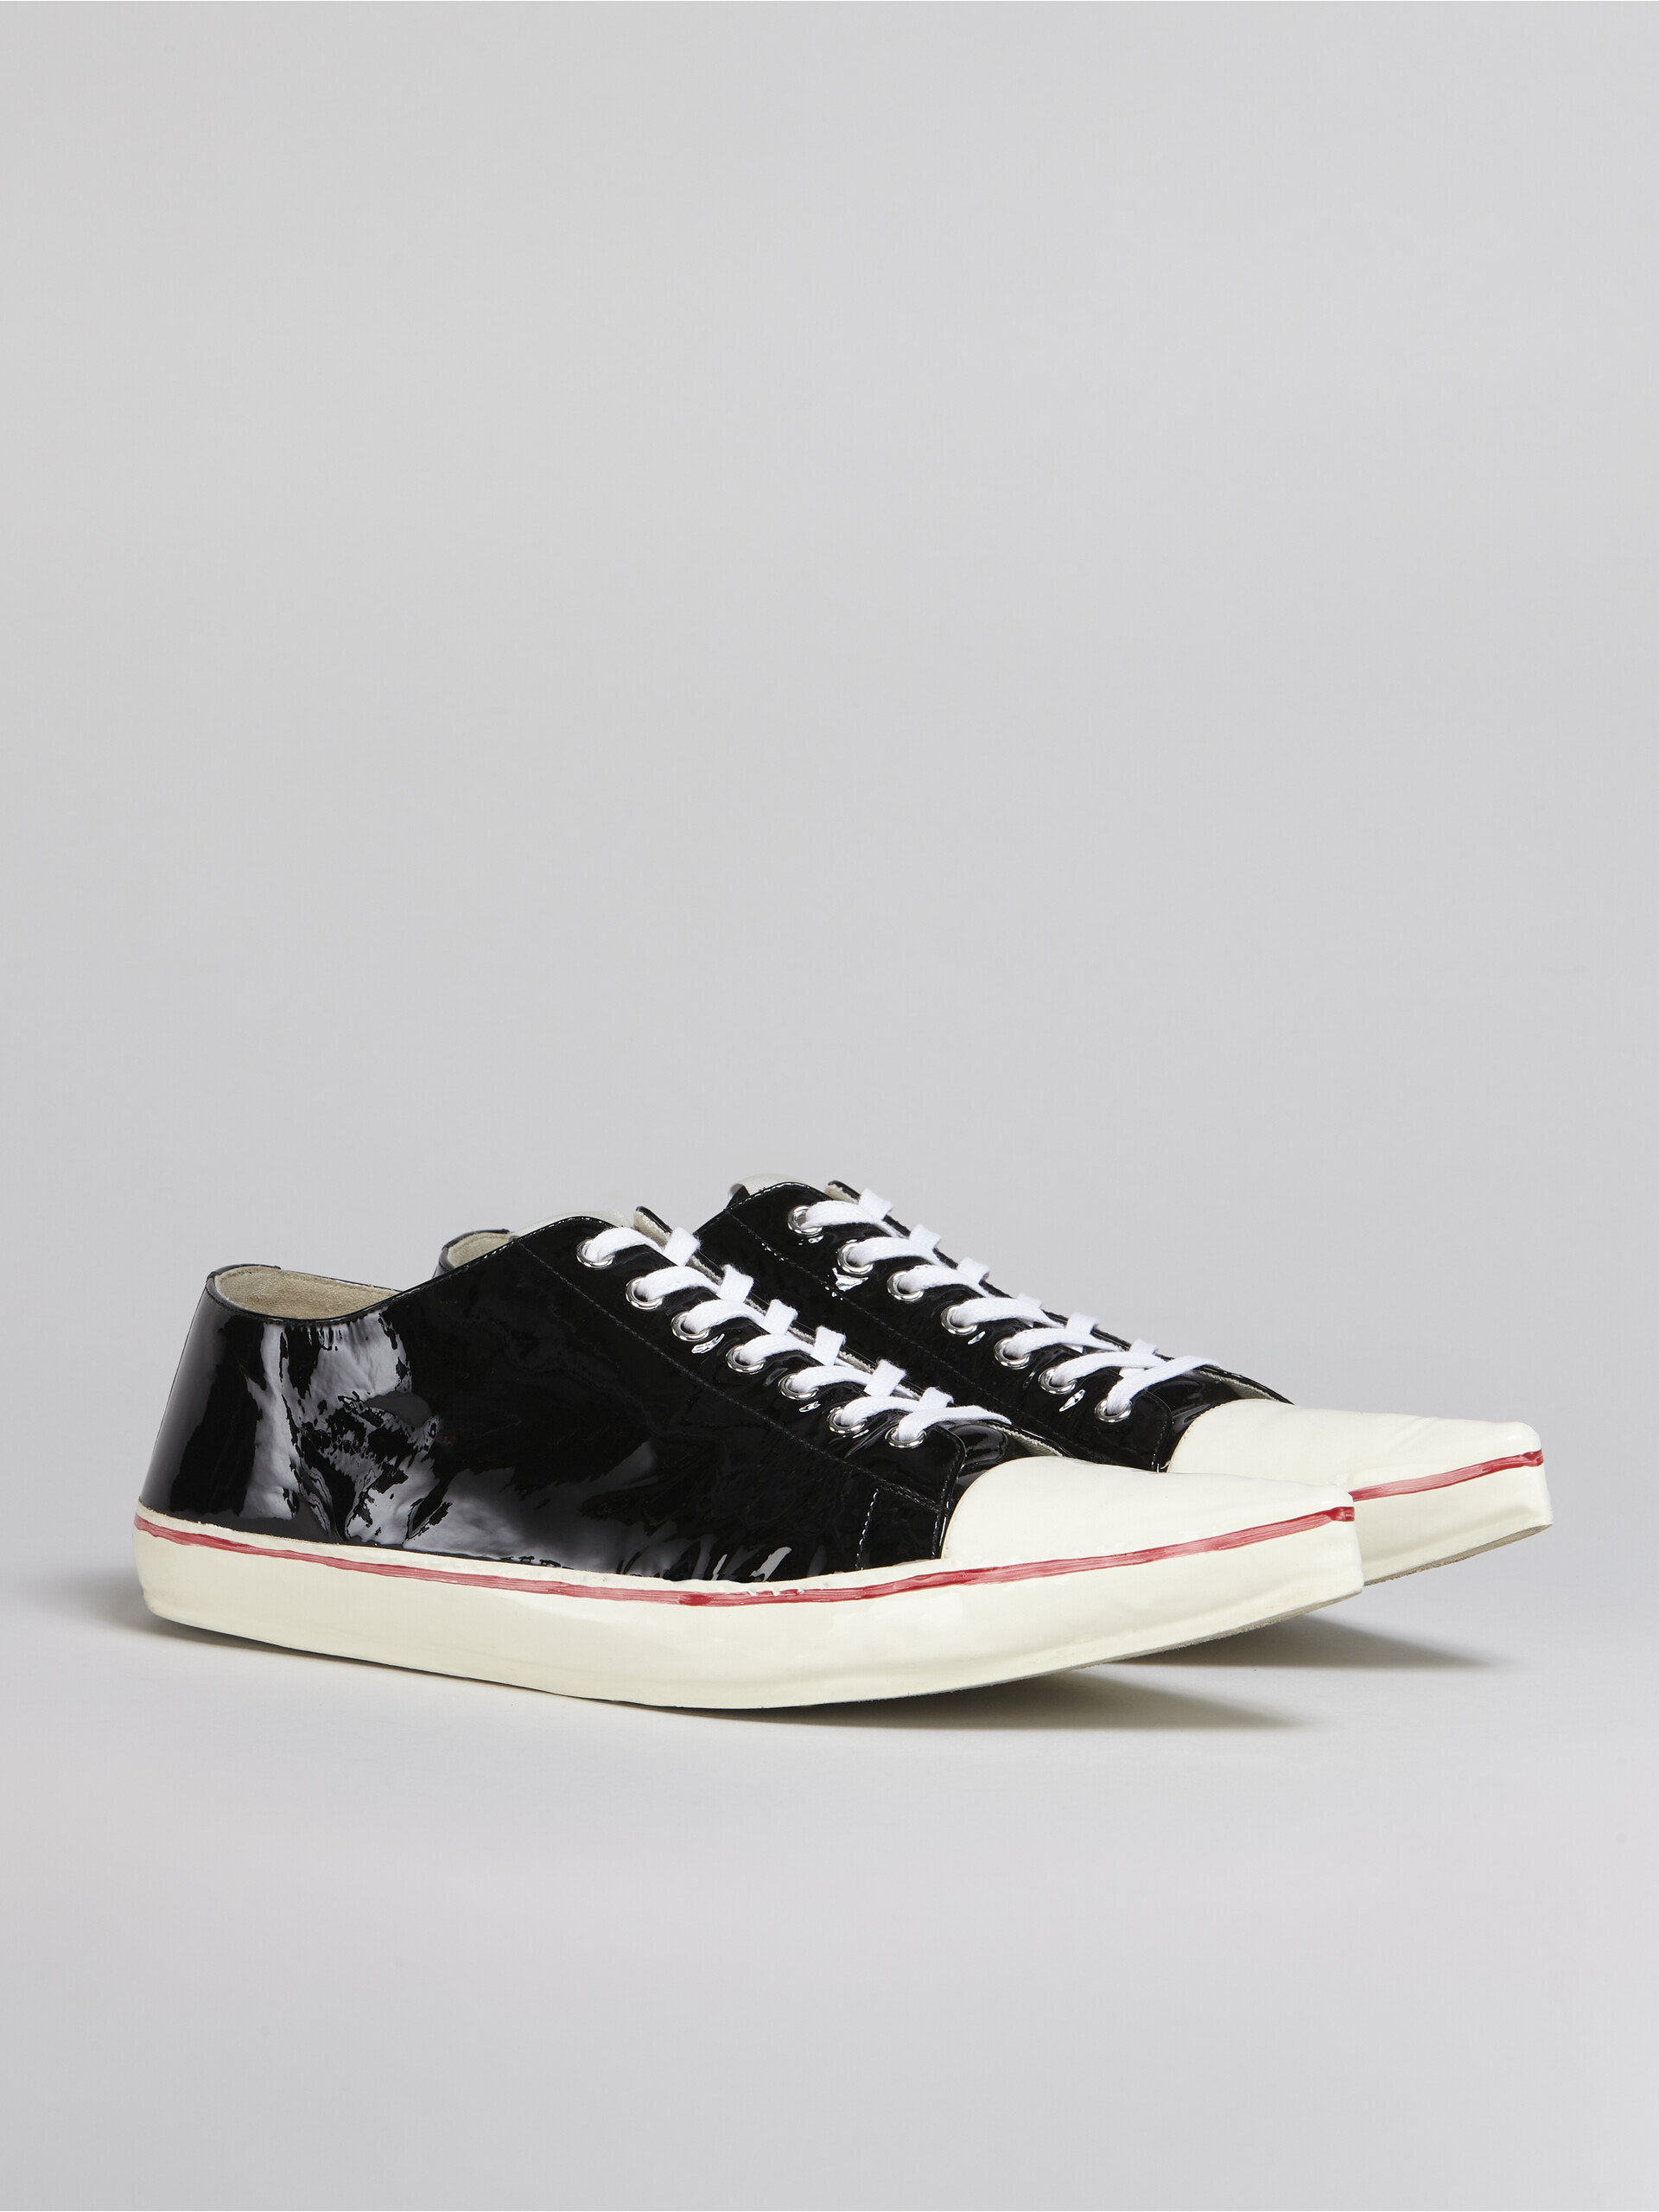 Patent leather GOOEY low-top sneaker - Sneakers - Image 2